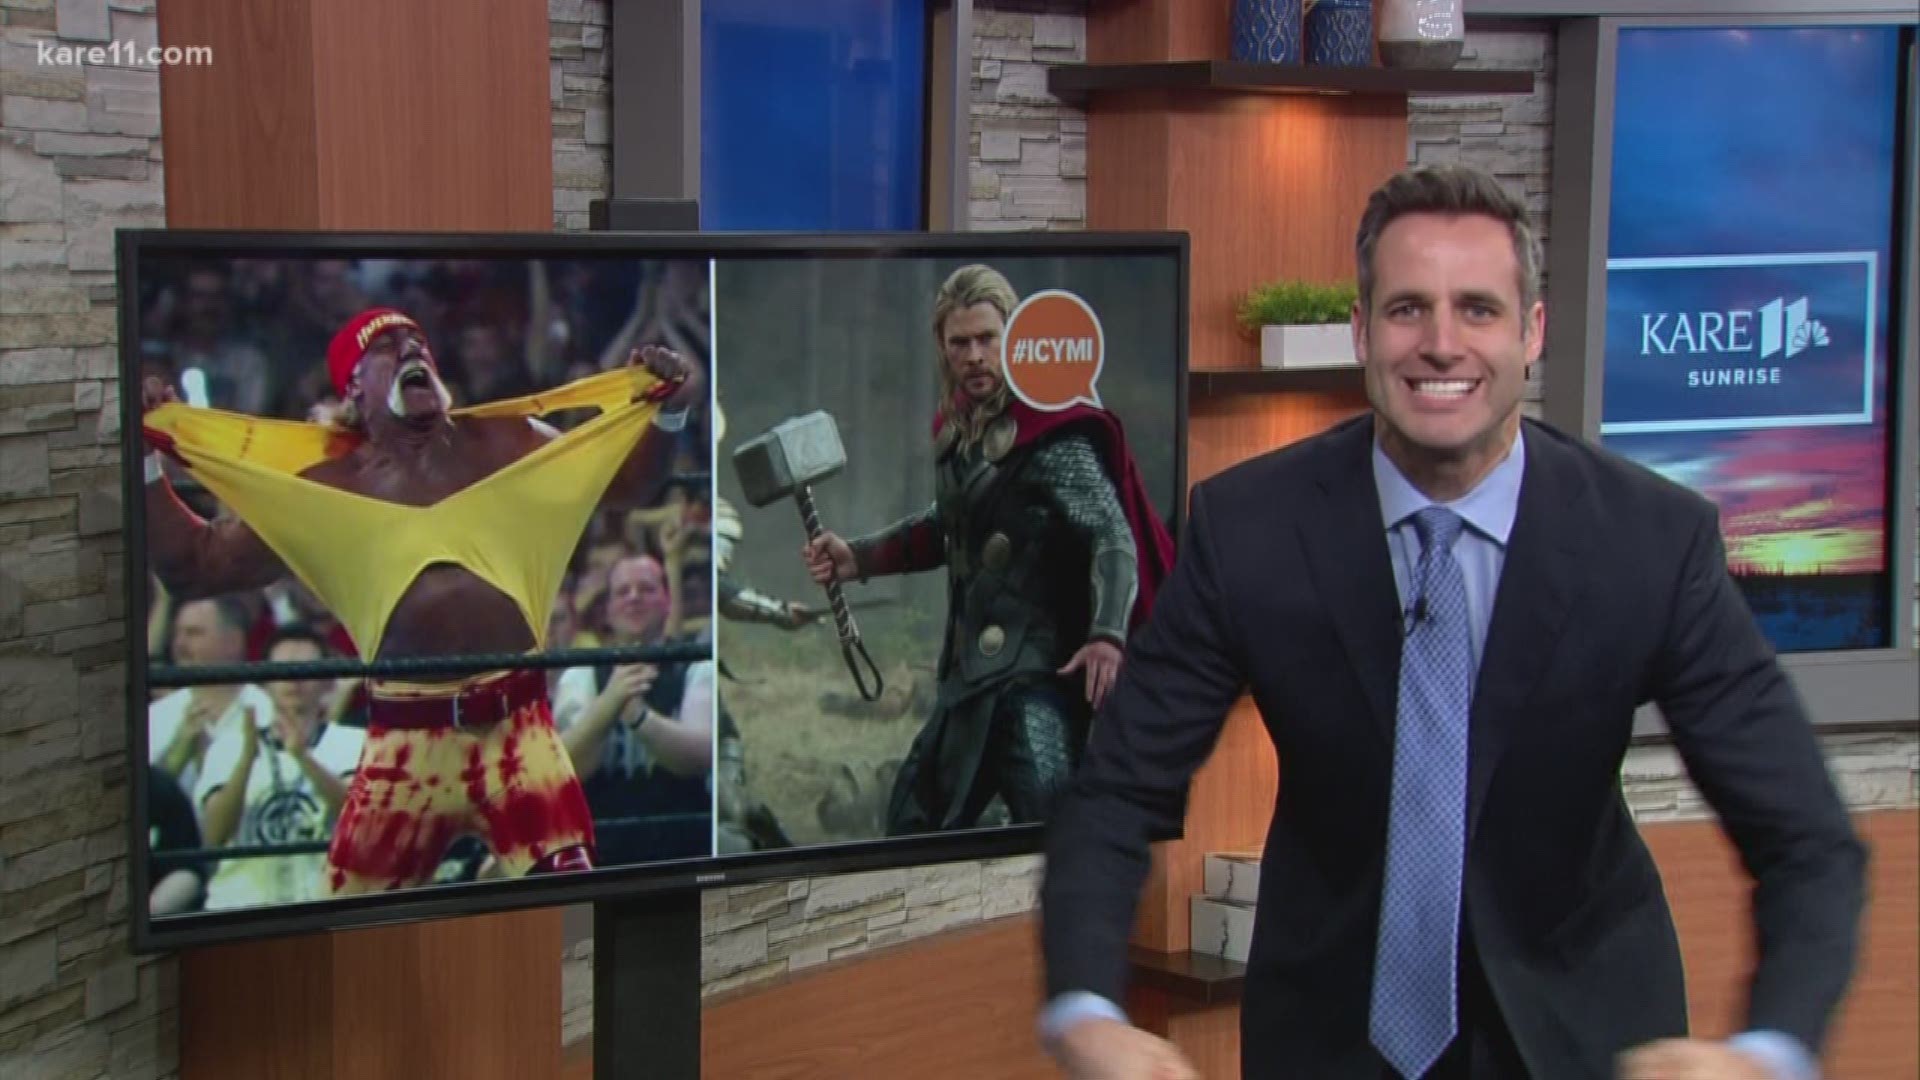 Did you know KARE 11's Kris Laudien is a big wrestling fan? He's pretty excited about the upcoming Hulk Hogan biopic.